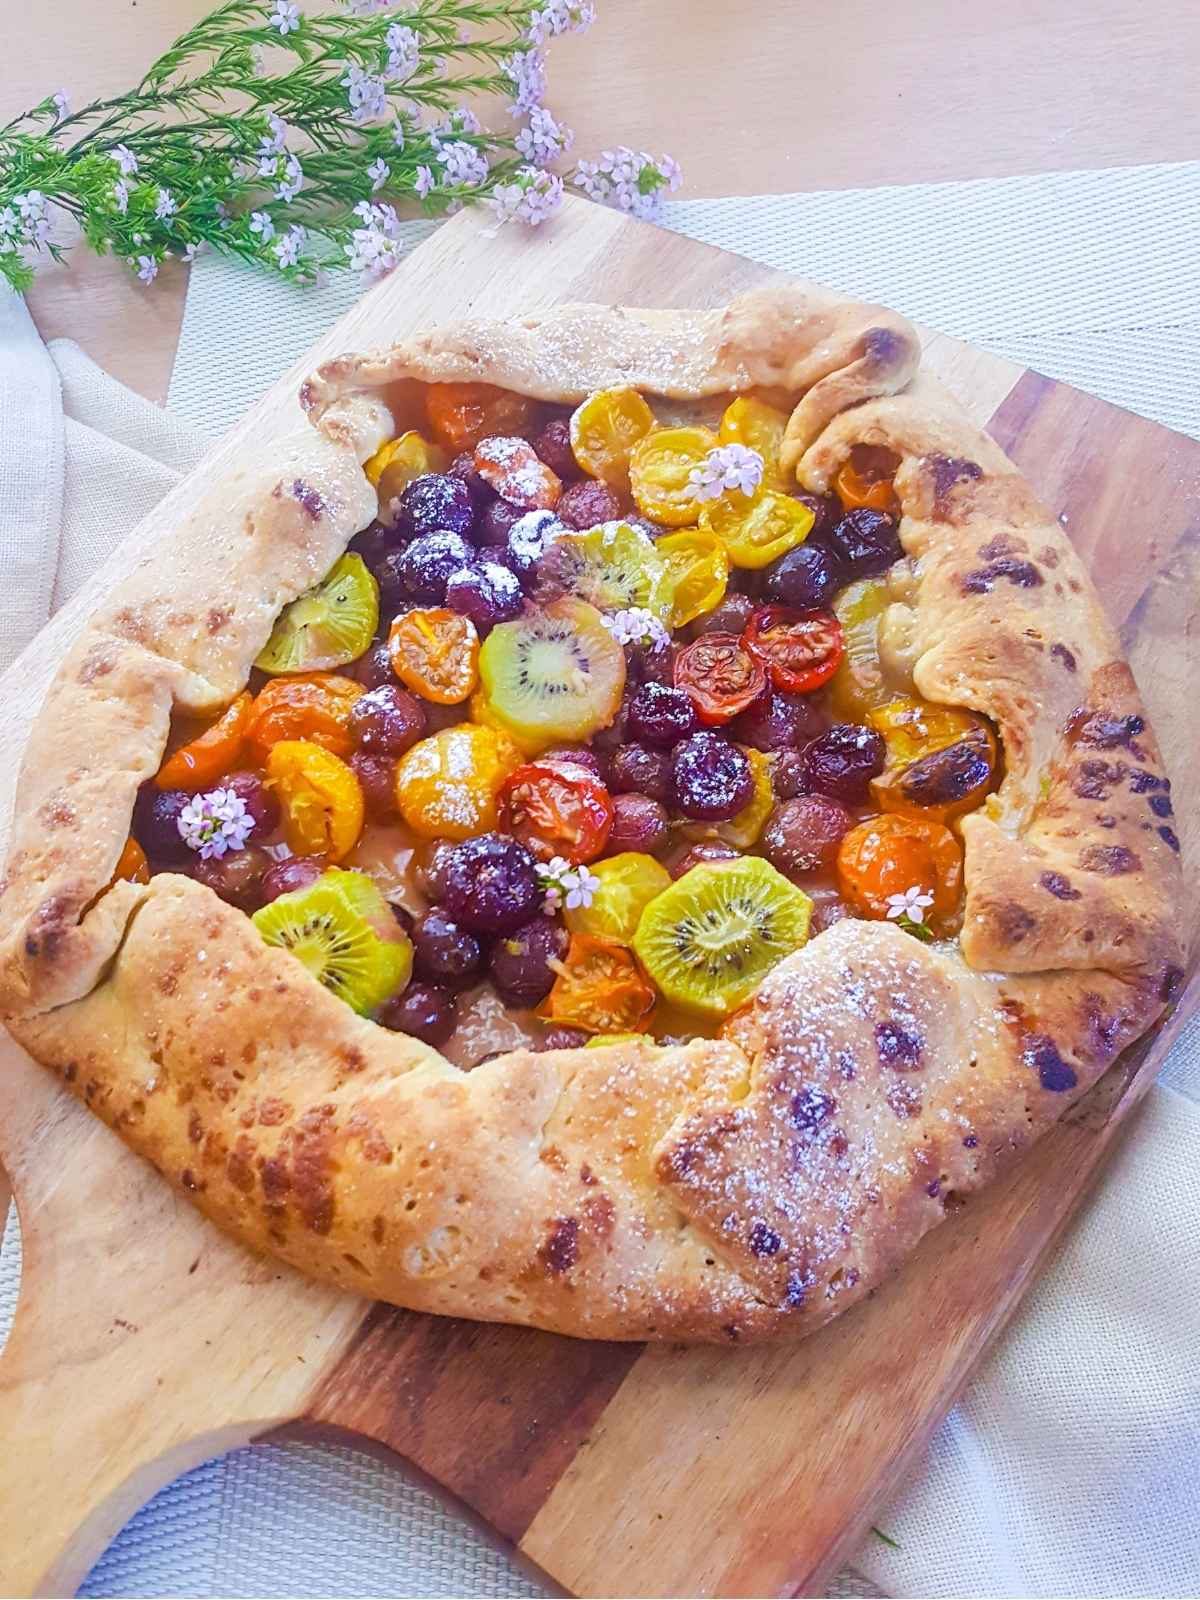 full vegan galette placed on a wooden board and flowers on background